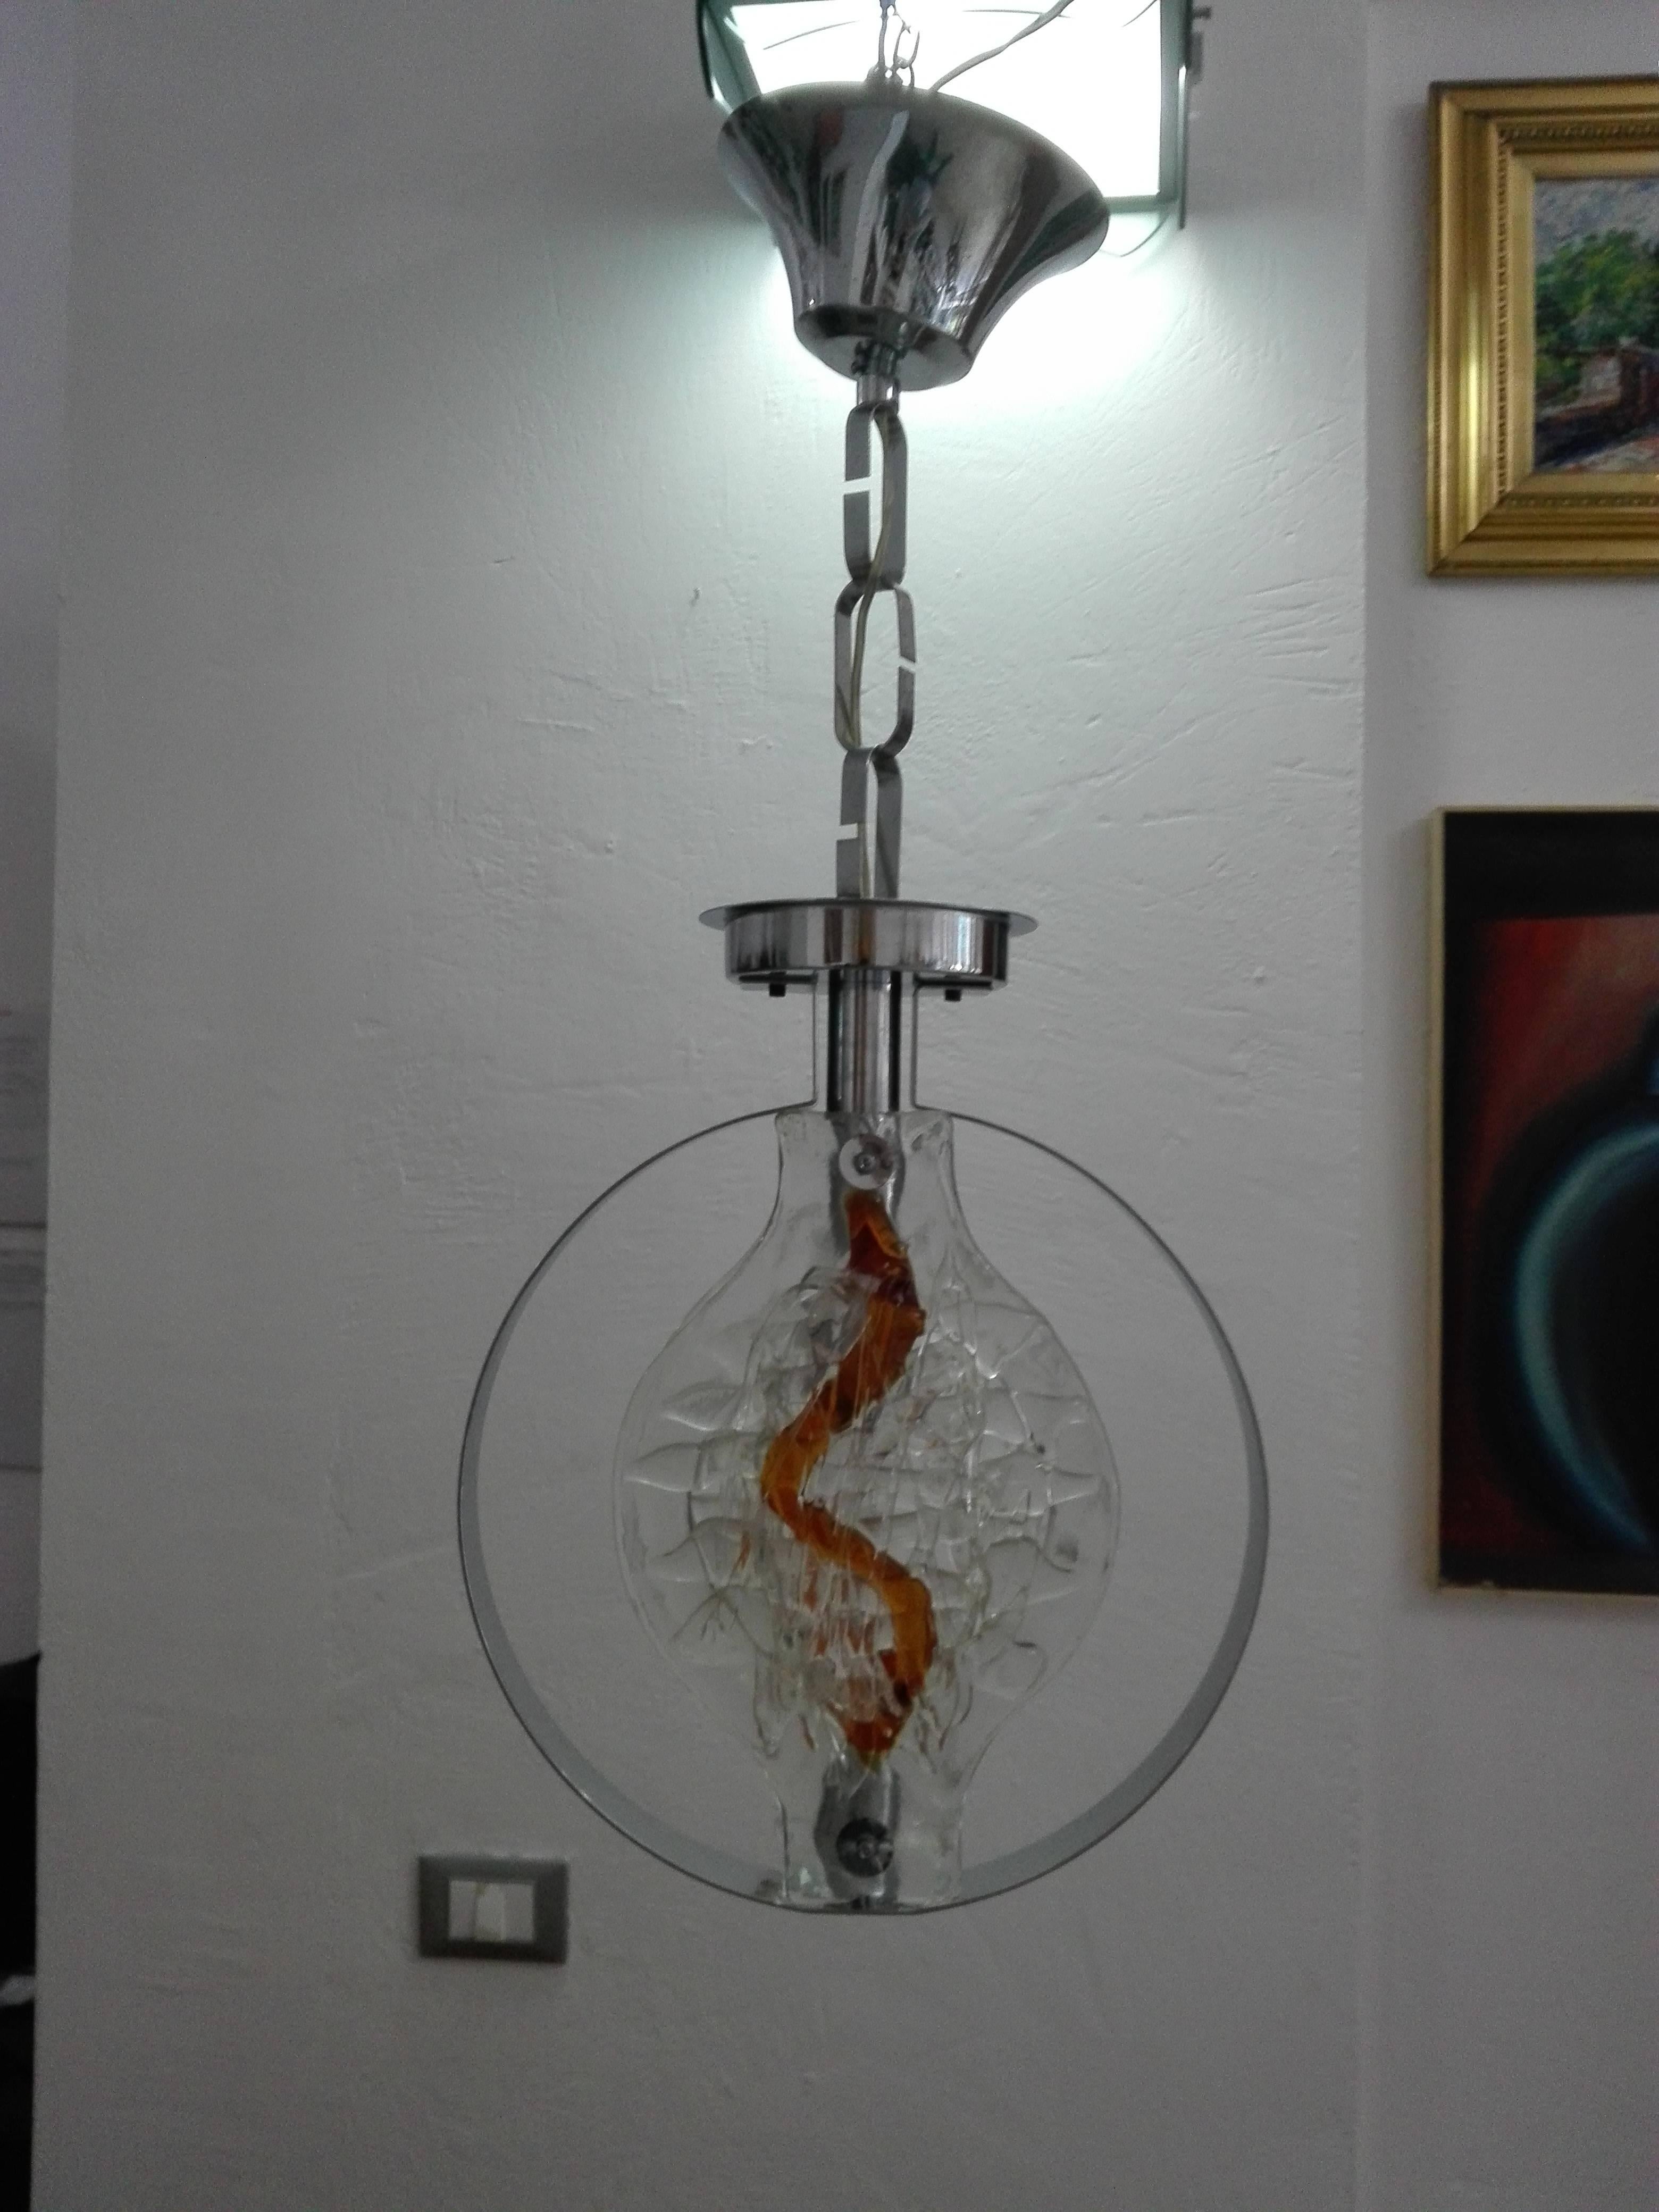 
Clear blown glass chandelier with amber inclusions.
Chromed steel structure with two handmade glass plates.
1970s Mazzega Murano production.